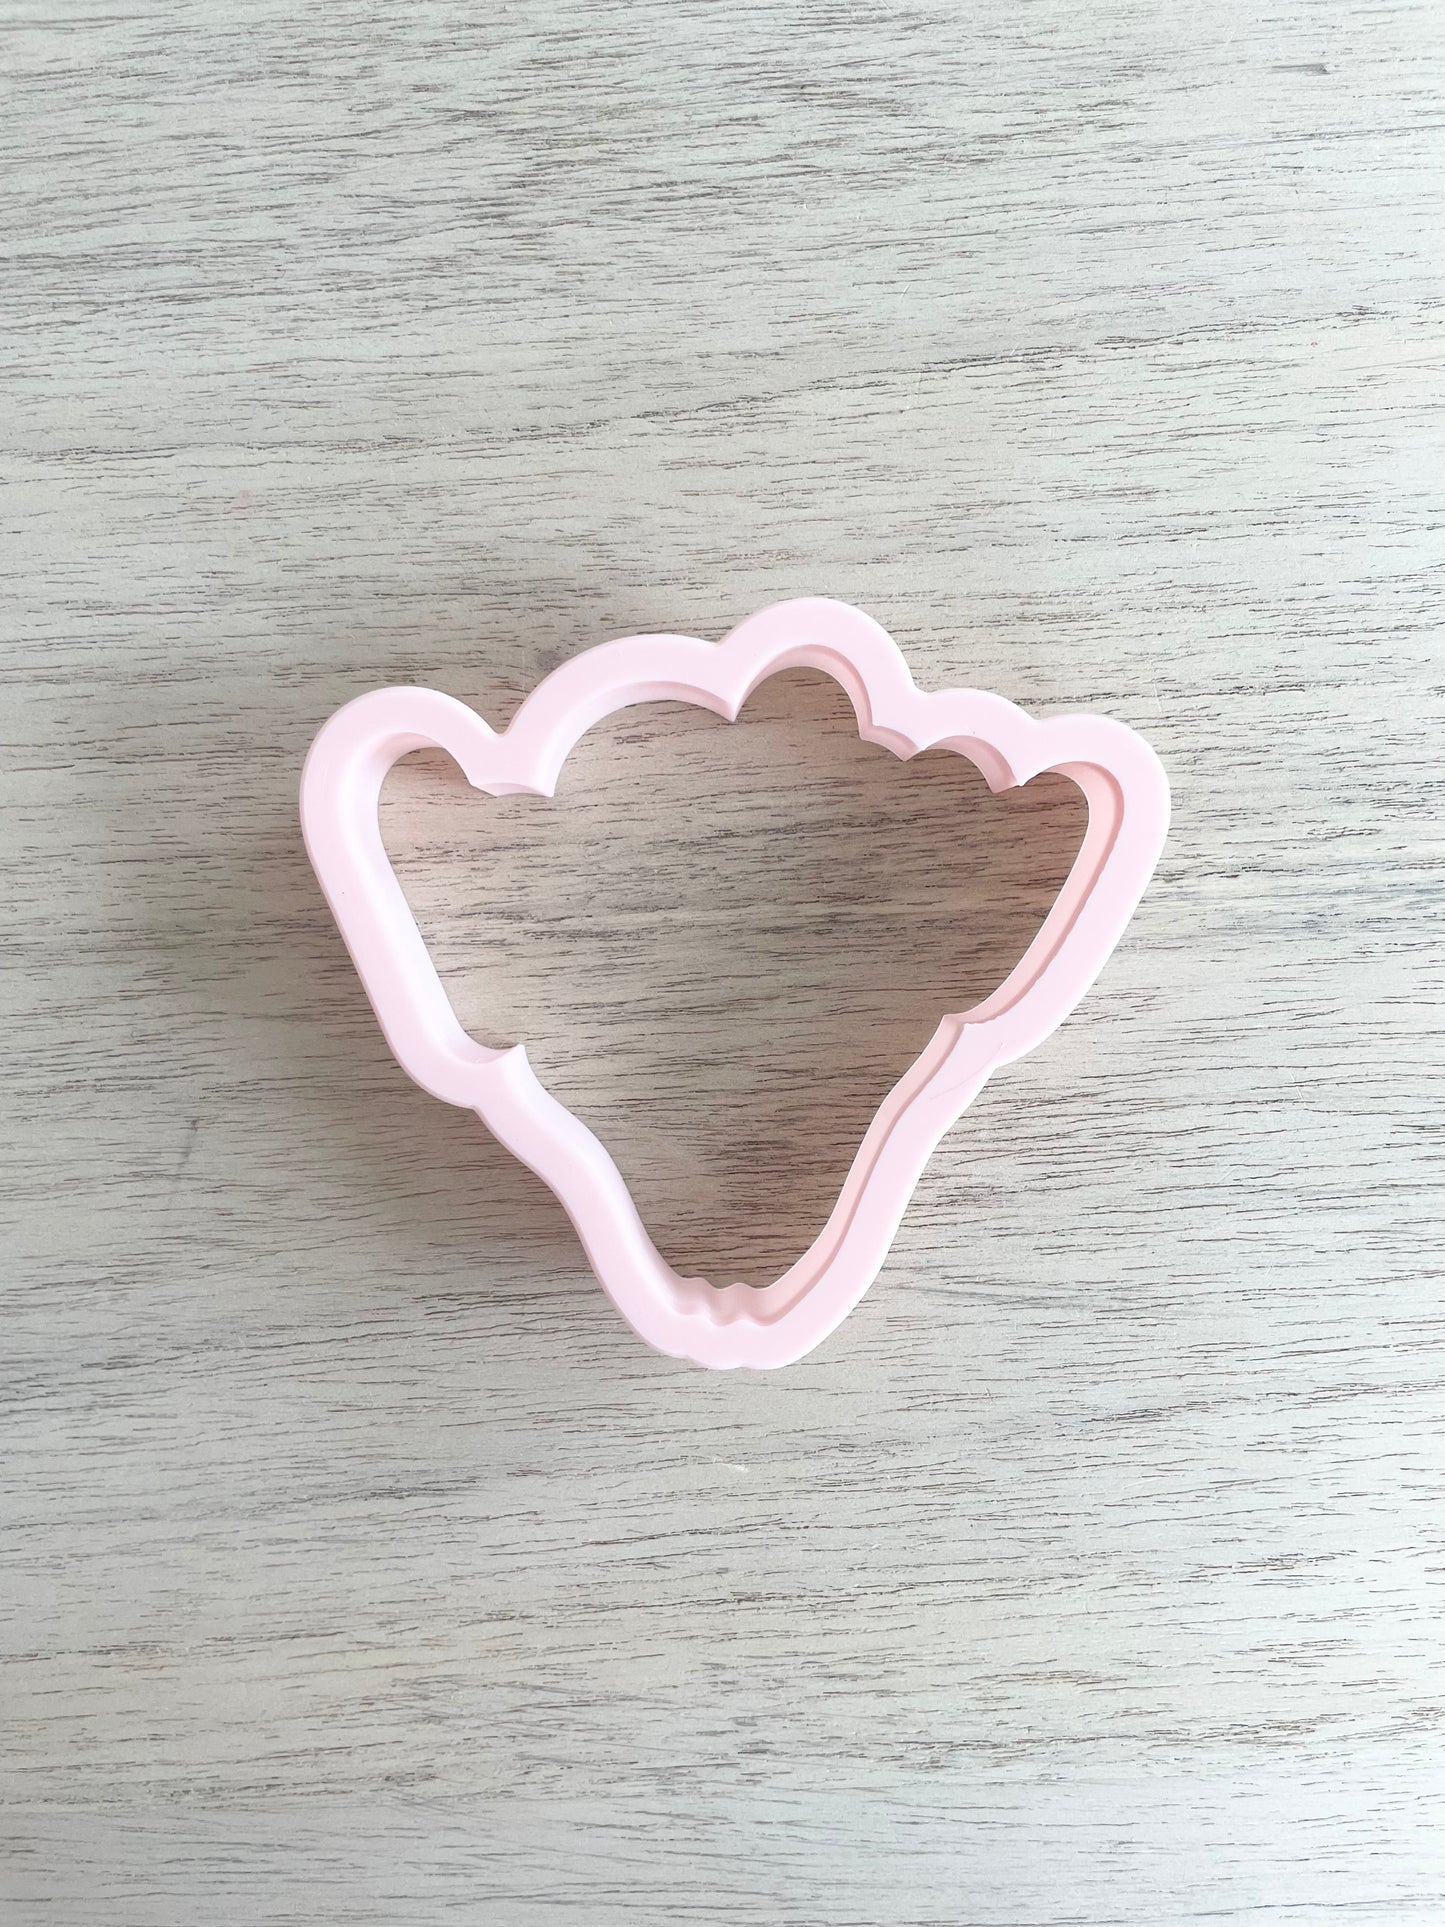 Baby Balloons Cookie Cutter